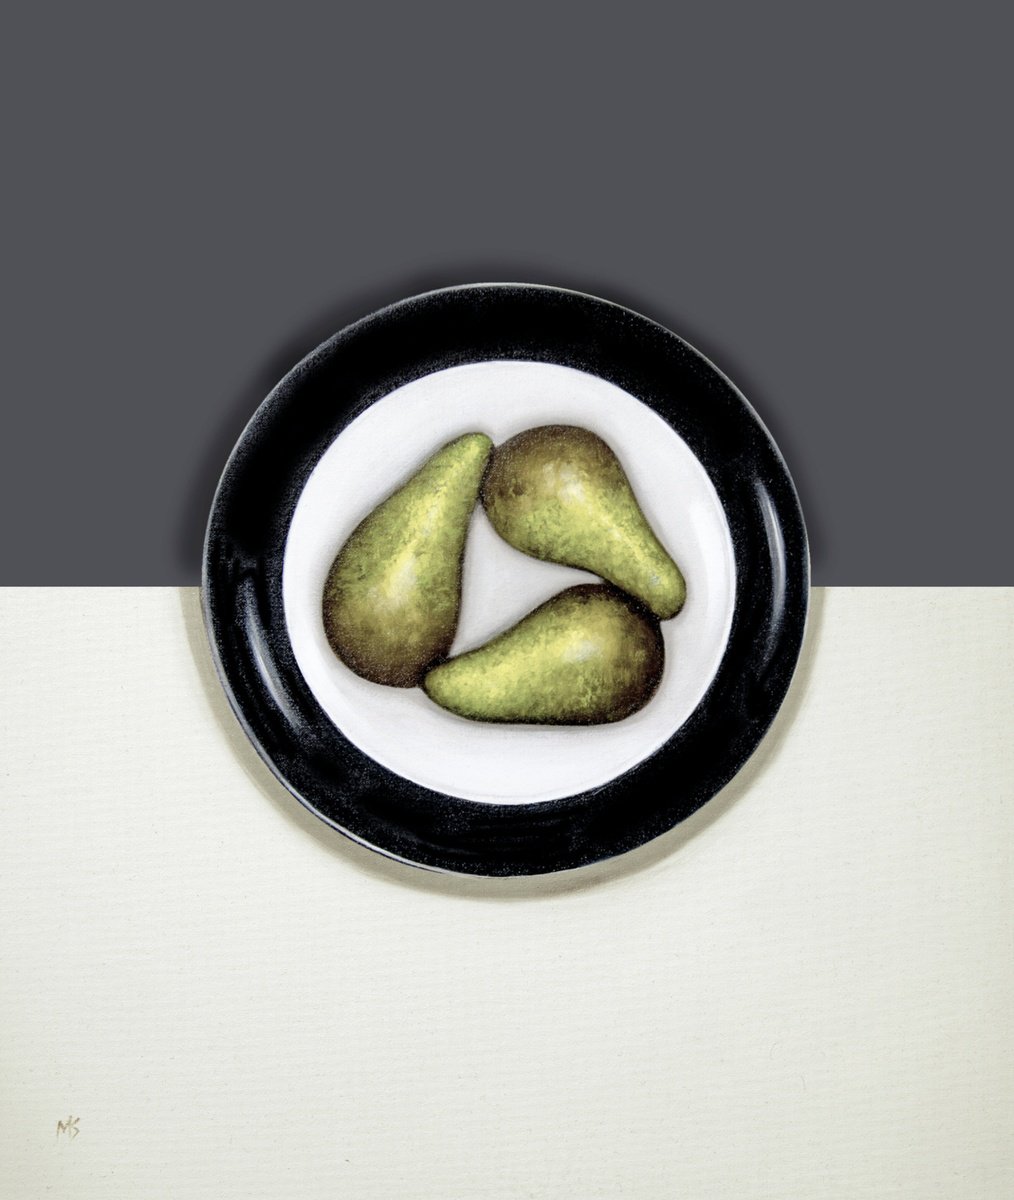 Pears on a plate by Mike Skidmore